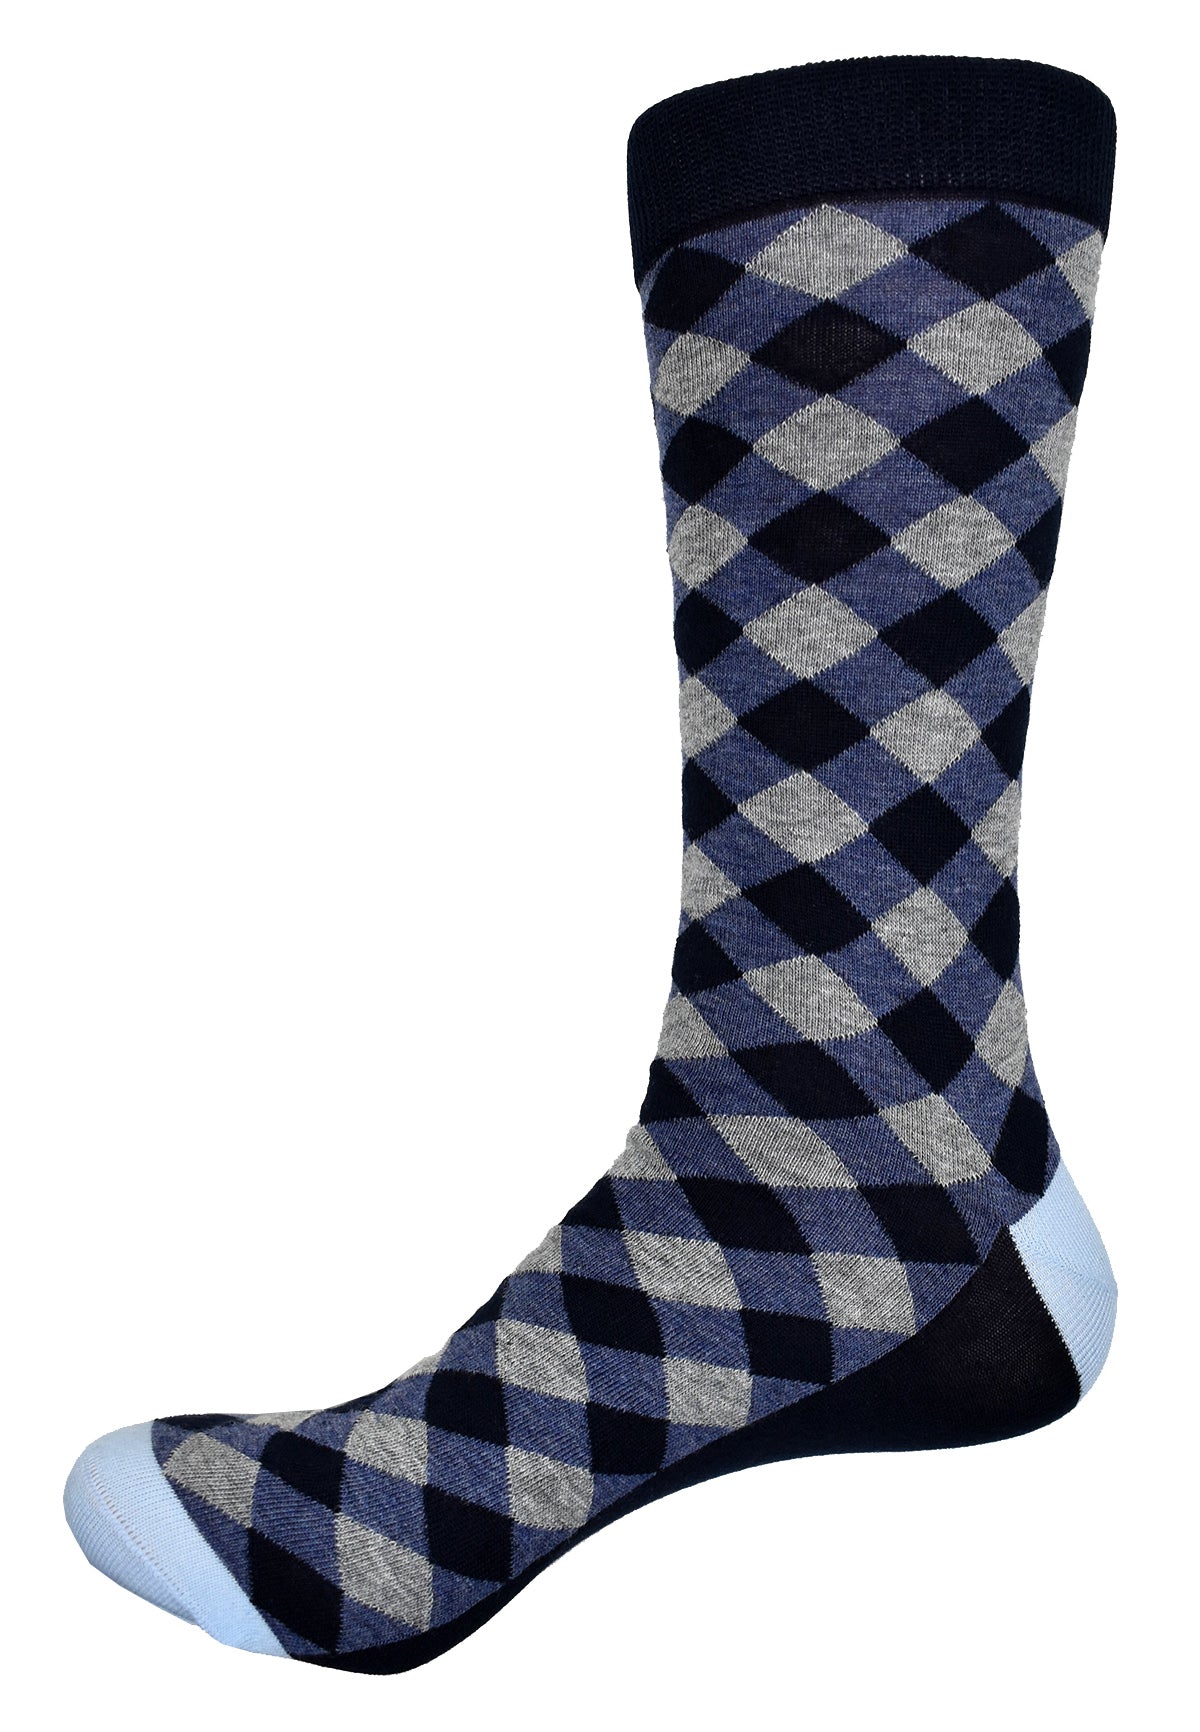 Classic navy and grey argyle style in a medium size pattern.  Soft mercerized cotton. Classic timeless pattern. Mid calf height. Fits sizes 9 - 12. Sock by Marcello Sport